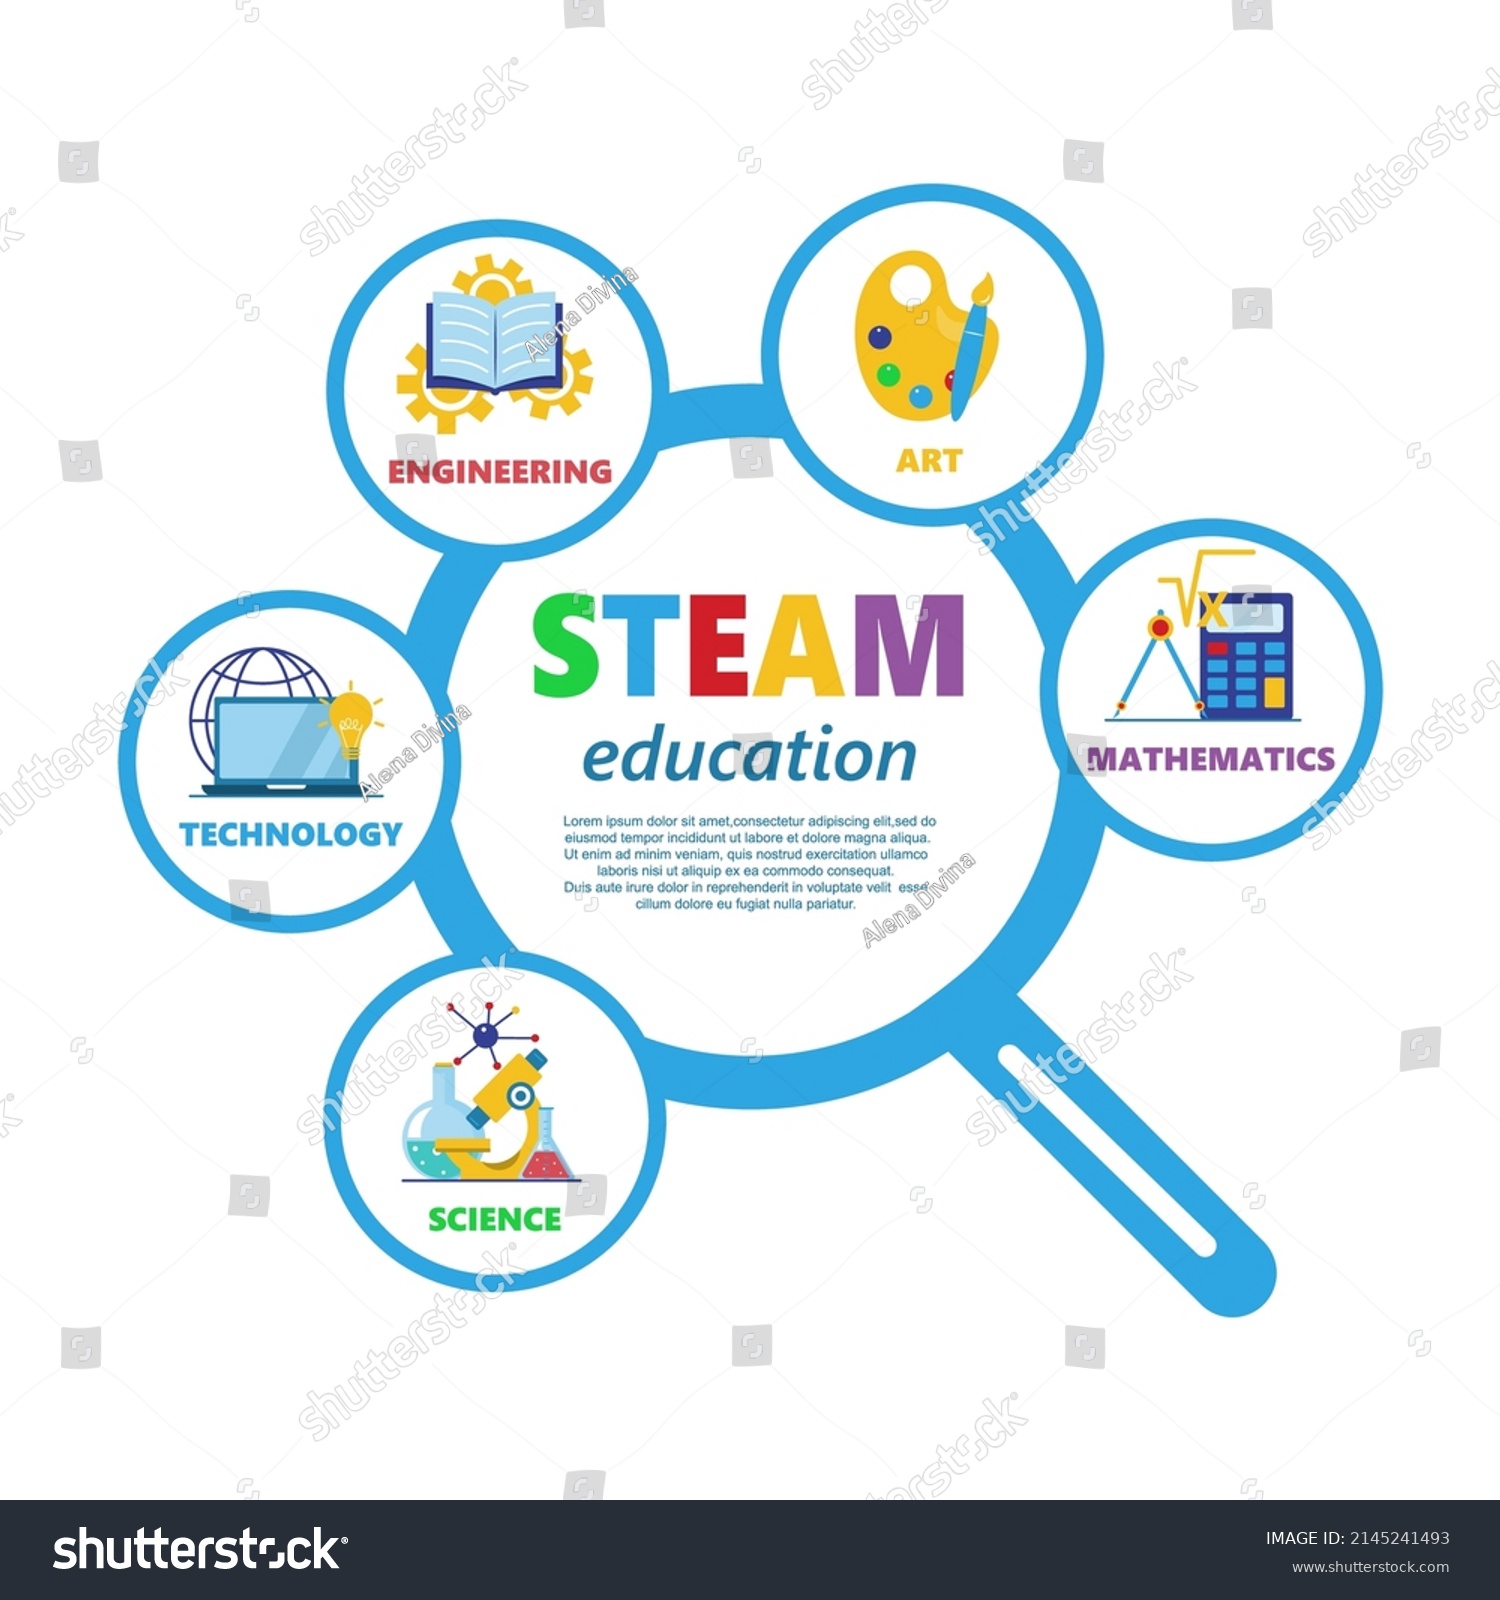 Steam science technology engineering and math фото 65